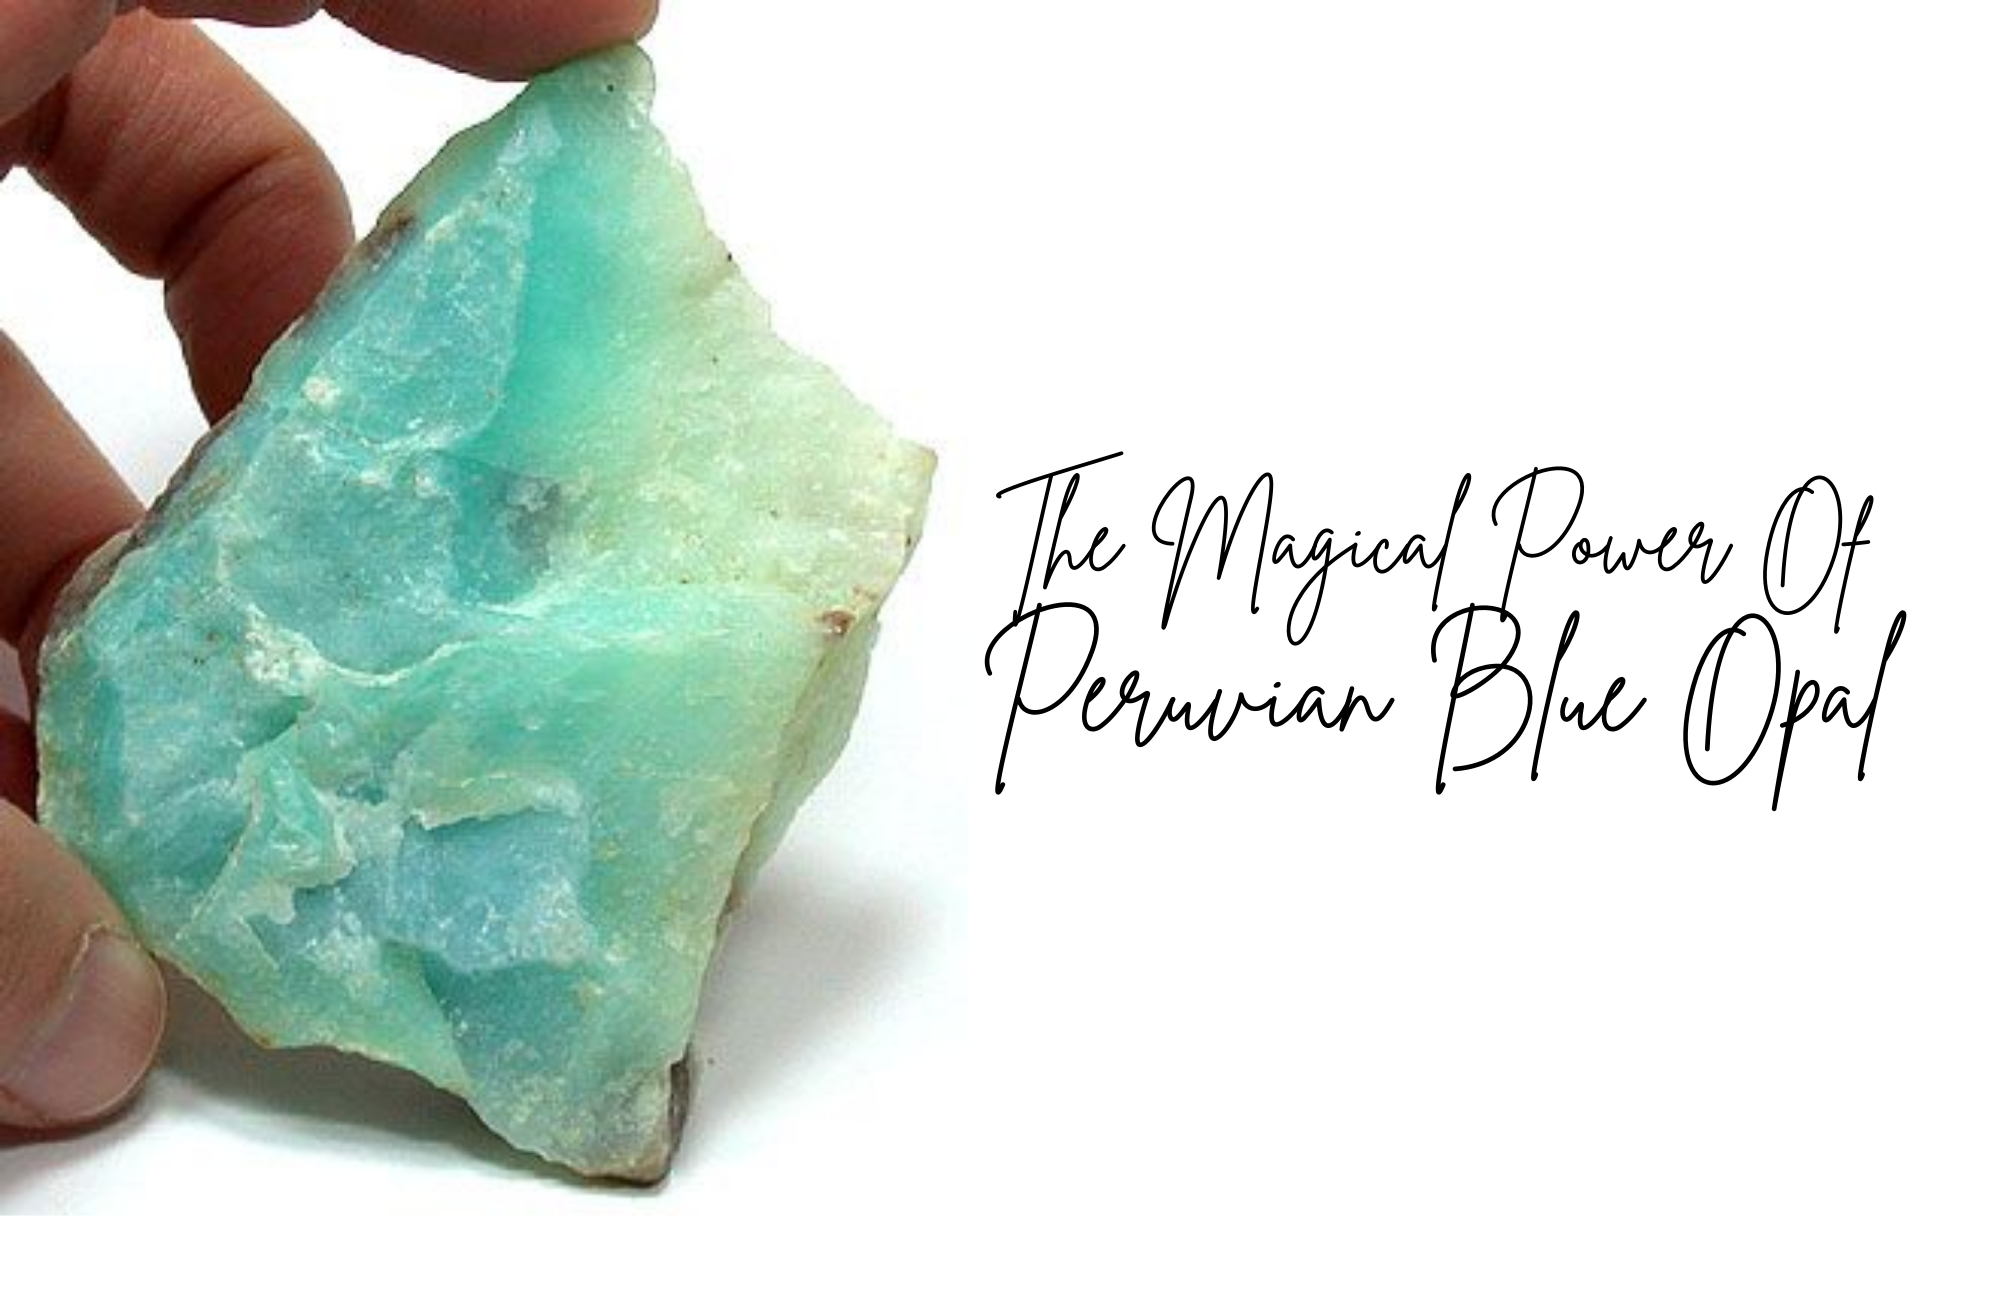 Peruvian blue opal held by a hand along with the phrase "The Magical Power of Peruvian Blue Opals"